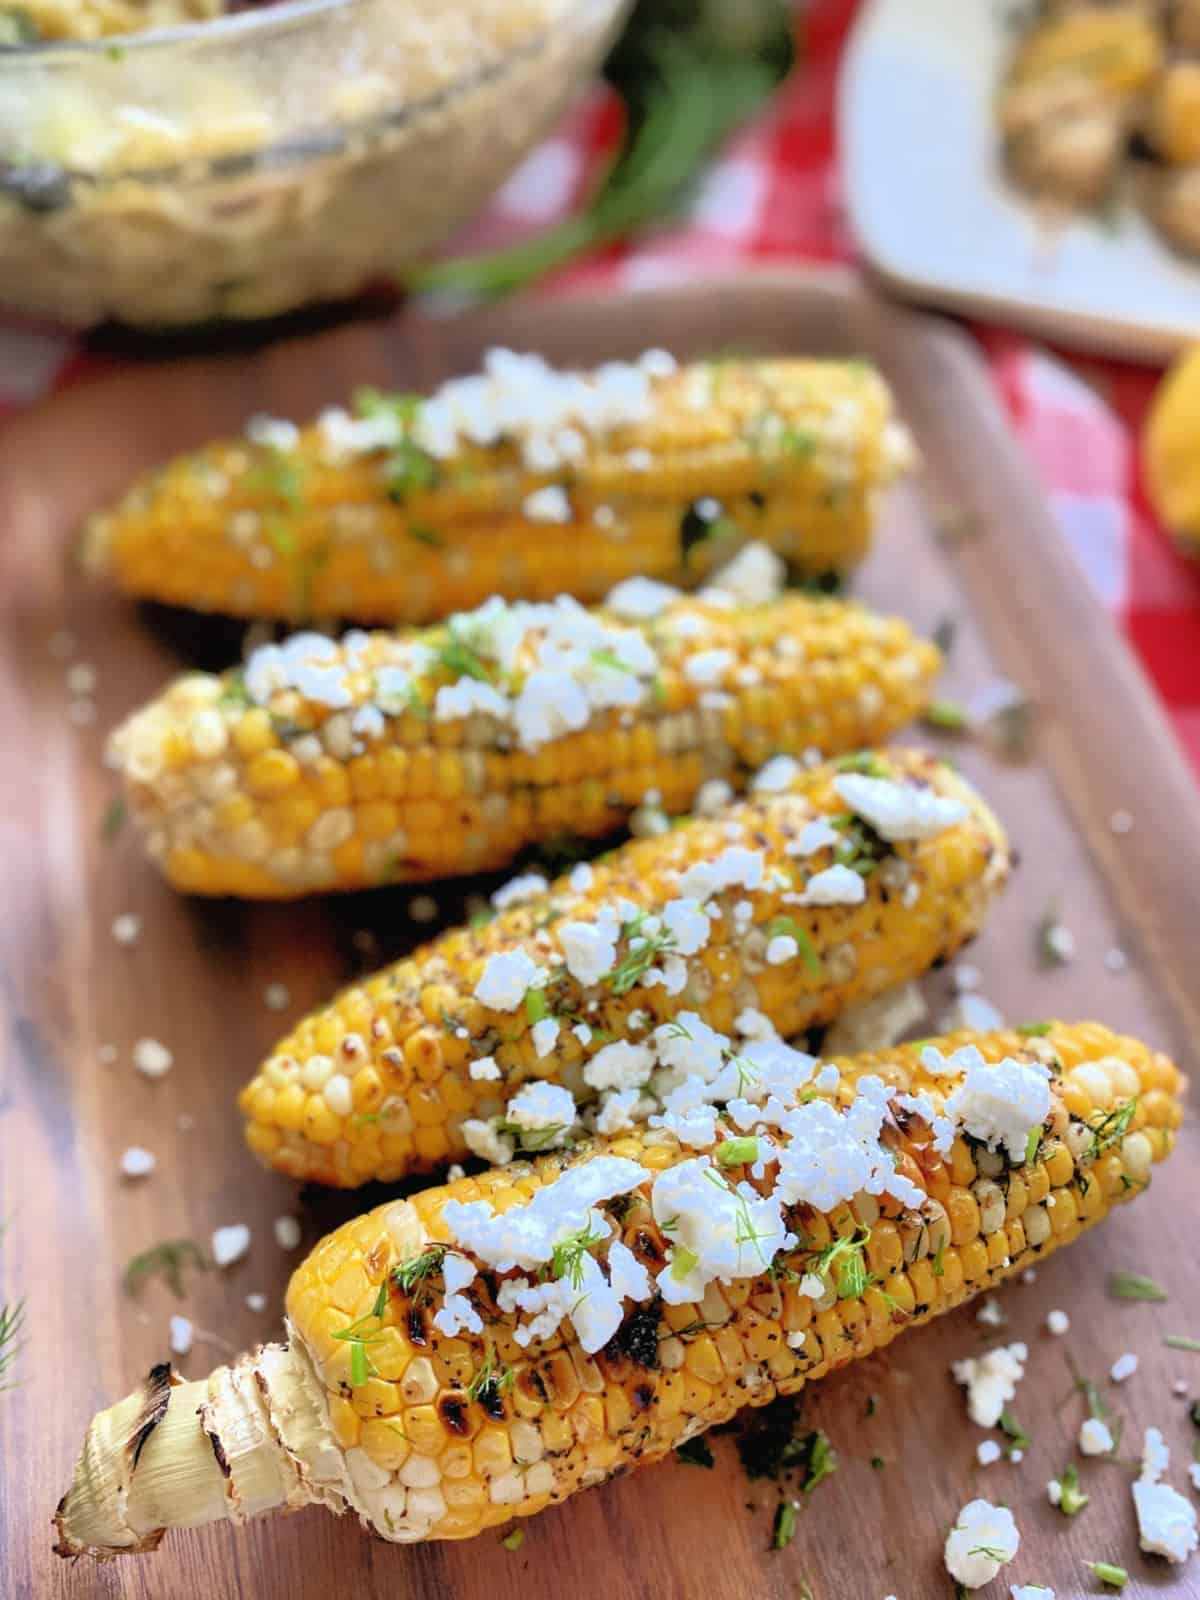 Greek Dill and Butter Grilled Corns on the Cob on a wooden tray.